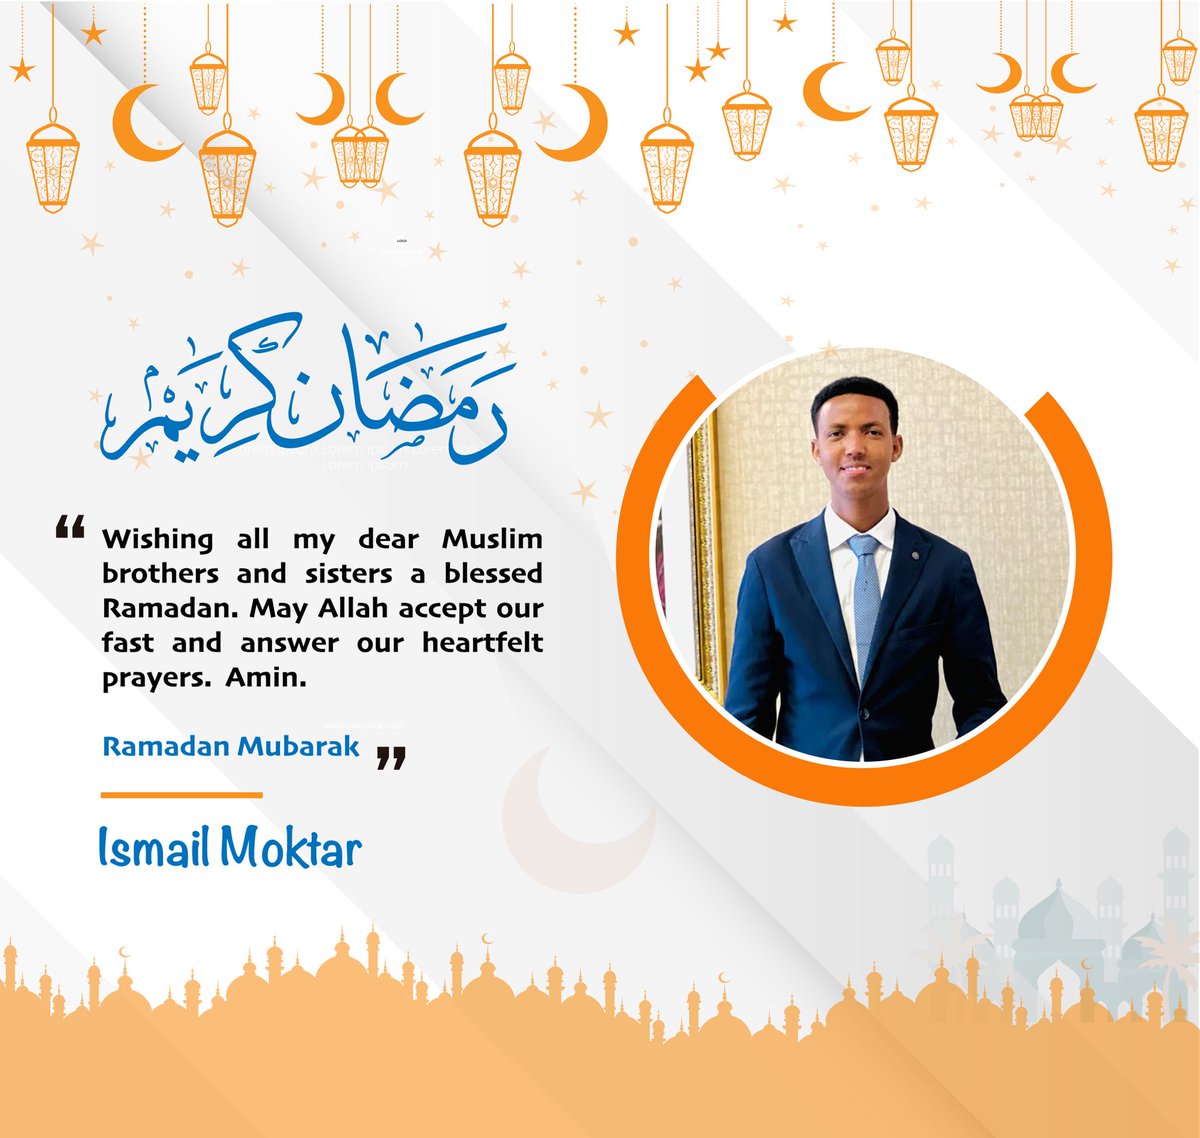 #Ramadankreem Wishing all my dear Muslim brothers and sisters a blessed Ramadan. May Allah accept our fast and answer our heartfelt prayers. Amin🤲

#RamadanMubarak